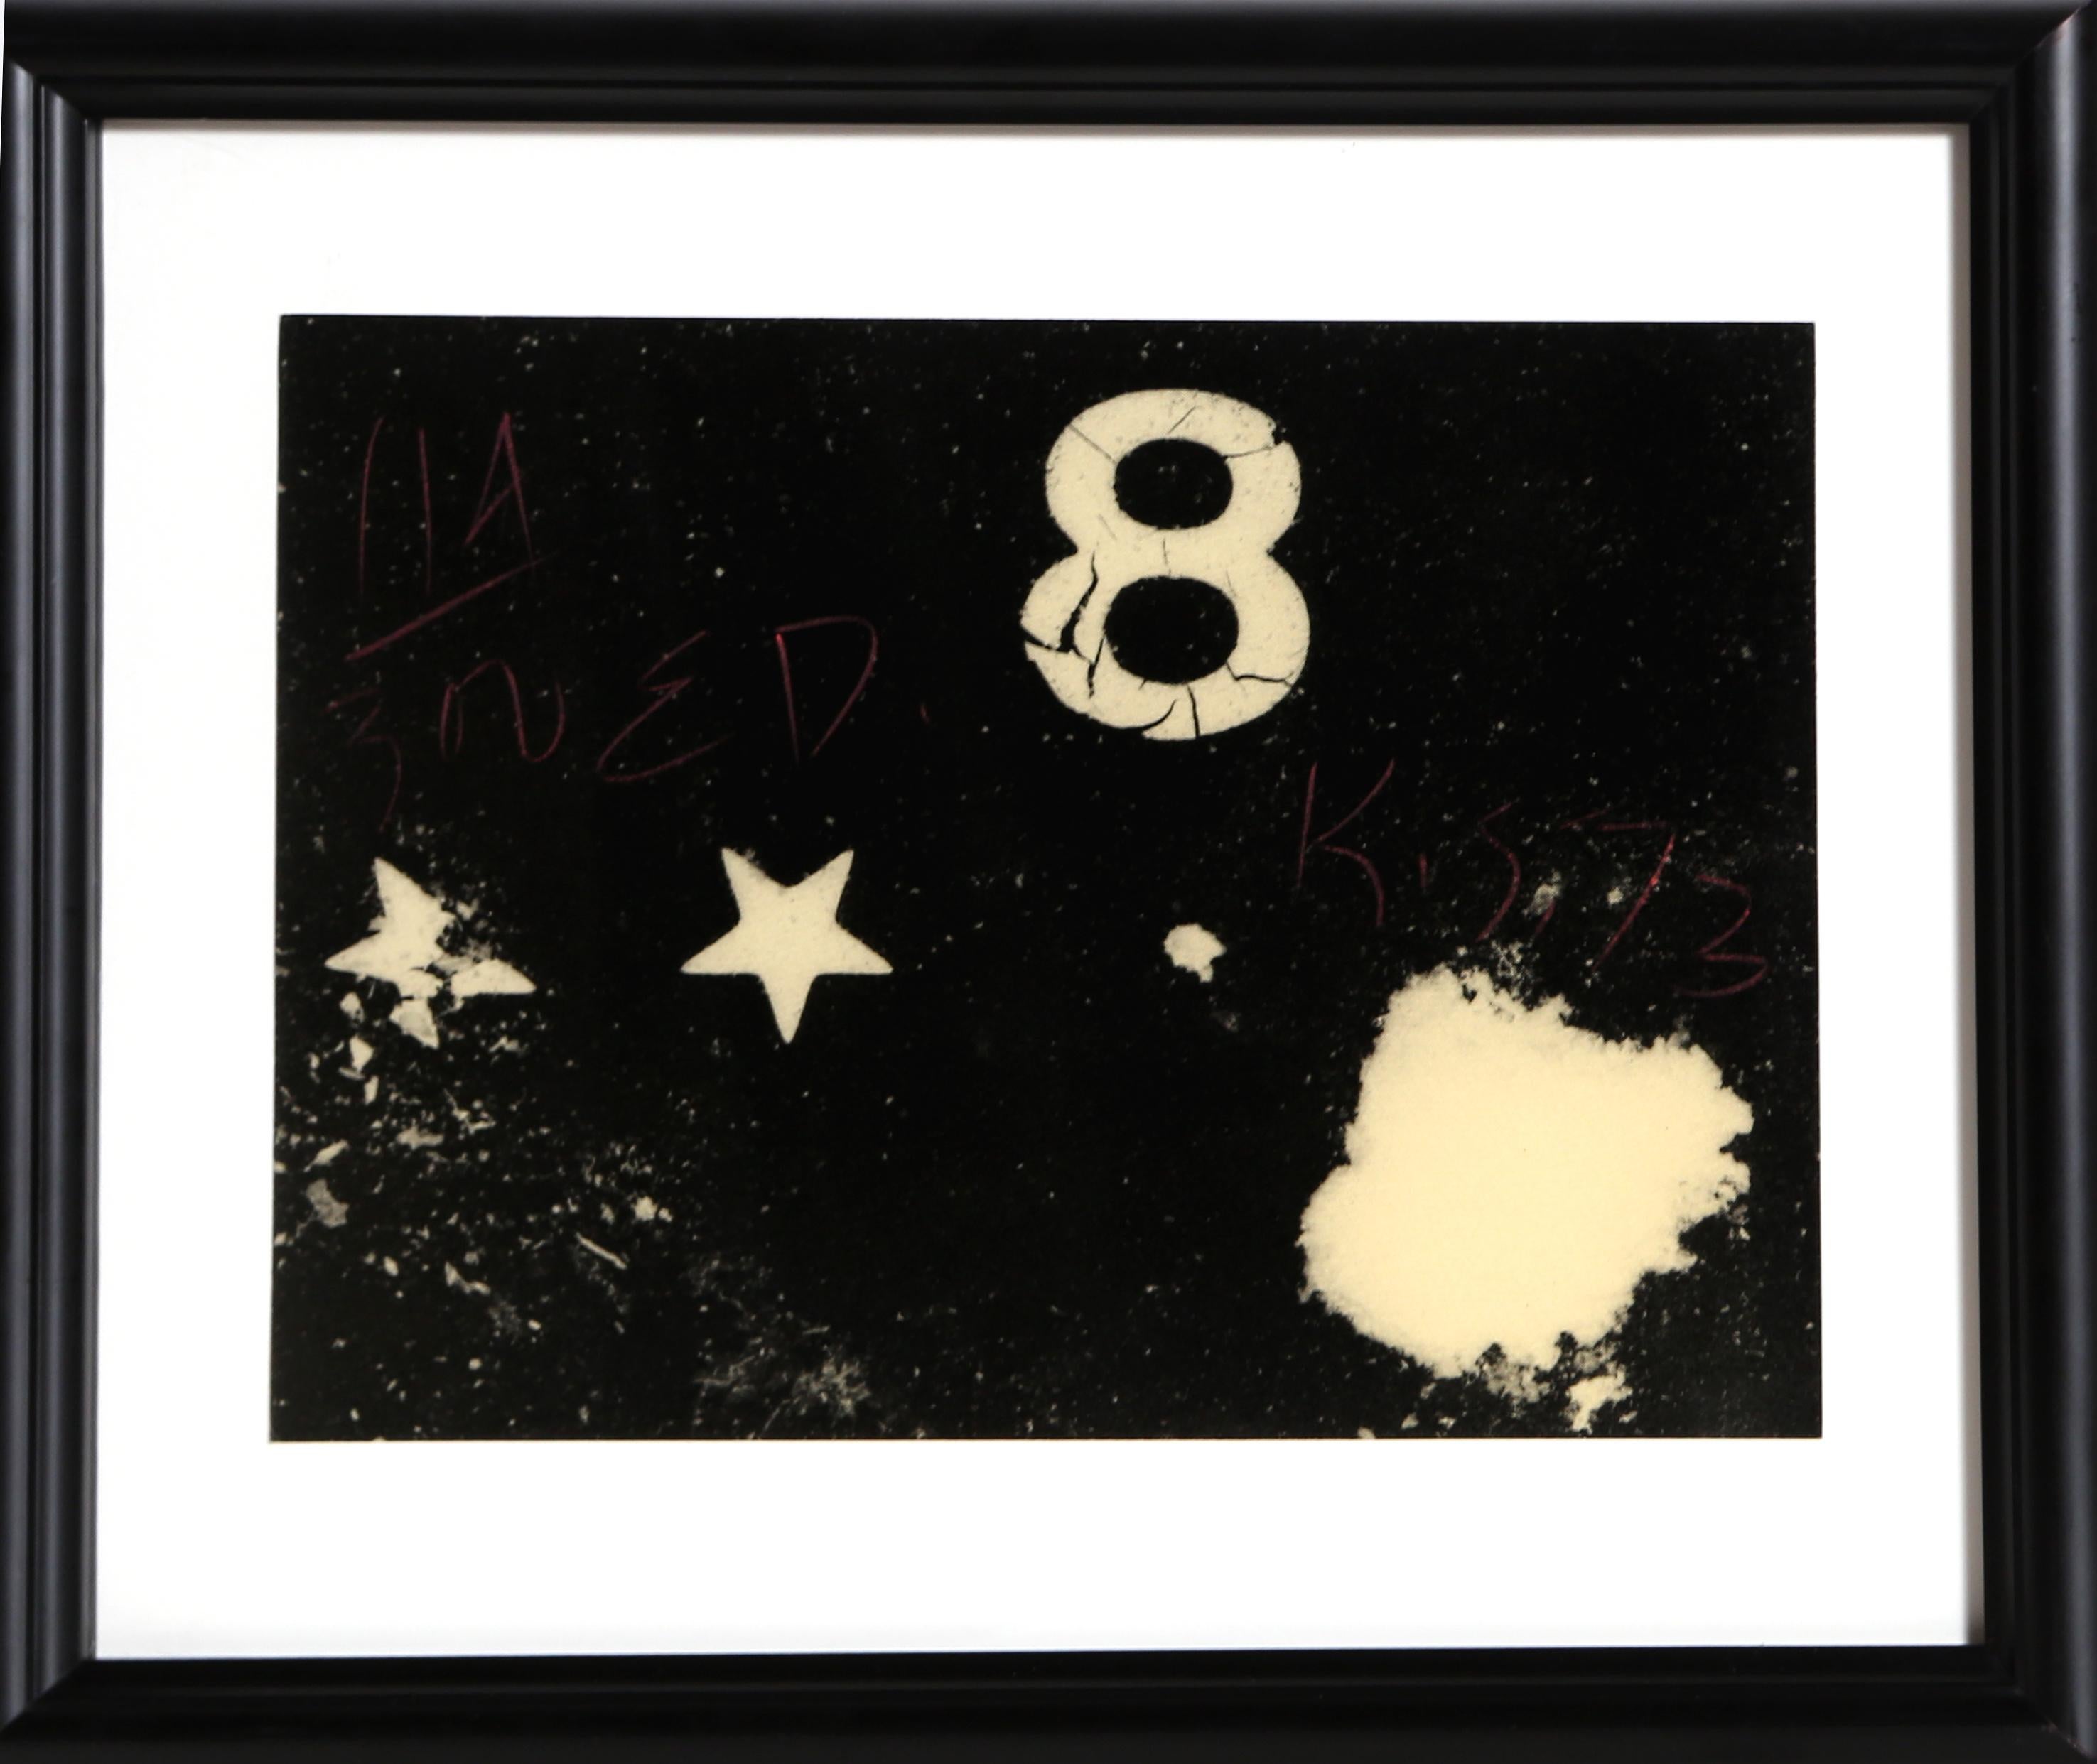 Artist: Keith Sonnier, American (1941 -  )
Title: The Number 8
Year: 1973
Medium:	Photographic Print, signed and dated in china marker 
Edition: 30
Paper Size: 9 x 12 inches / 23 x 30 cm